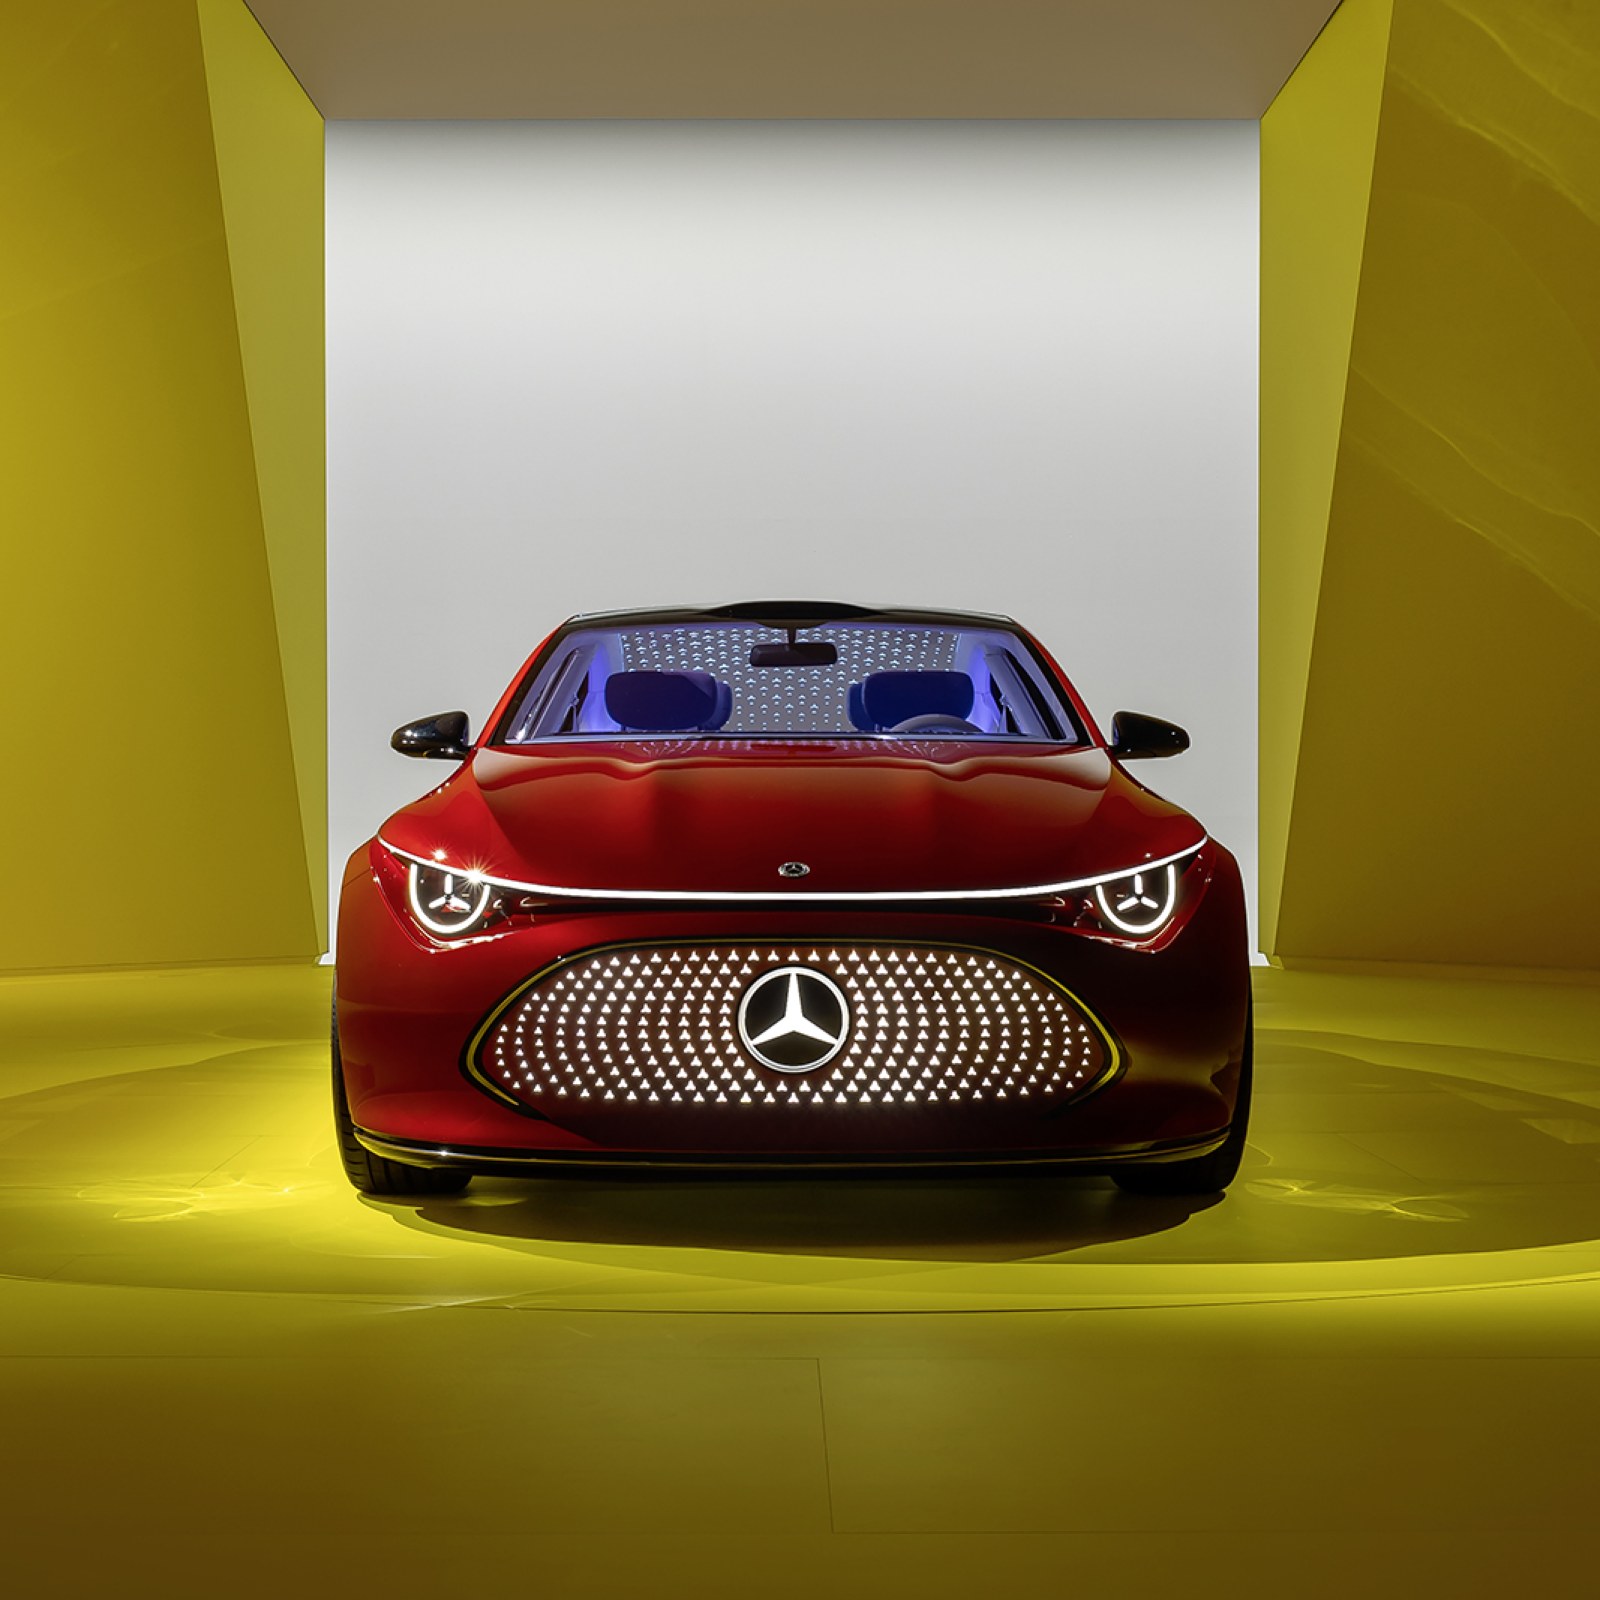 New Mercedes Car Is the 'Electric Future of Desire